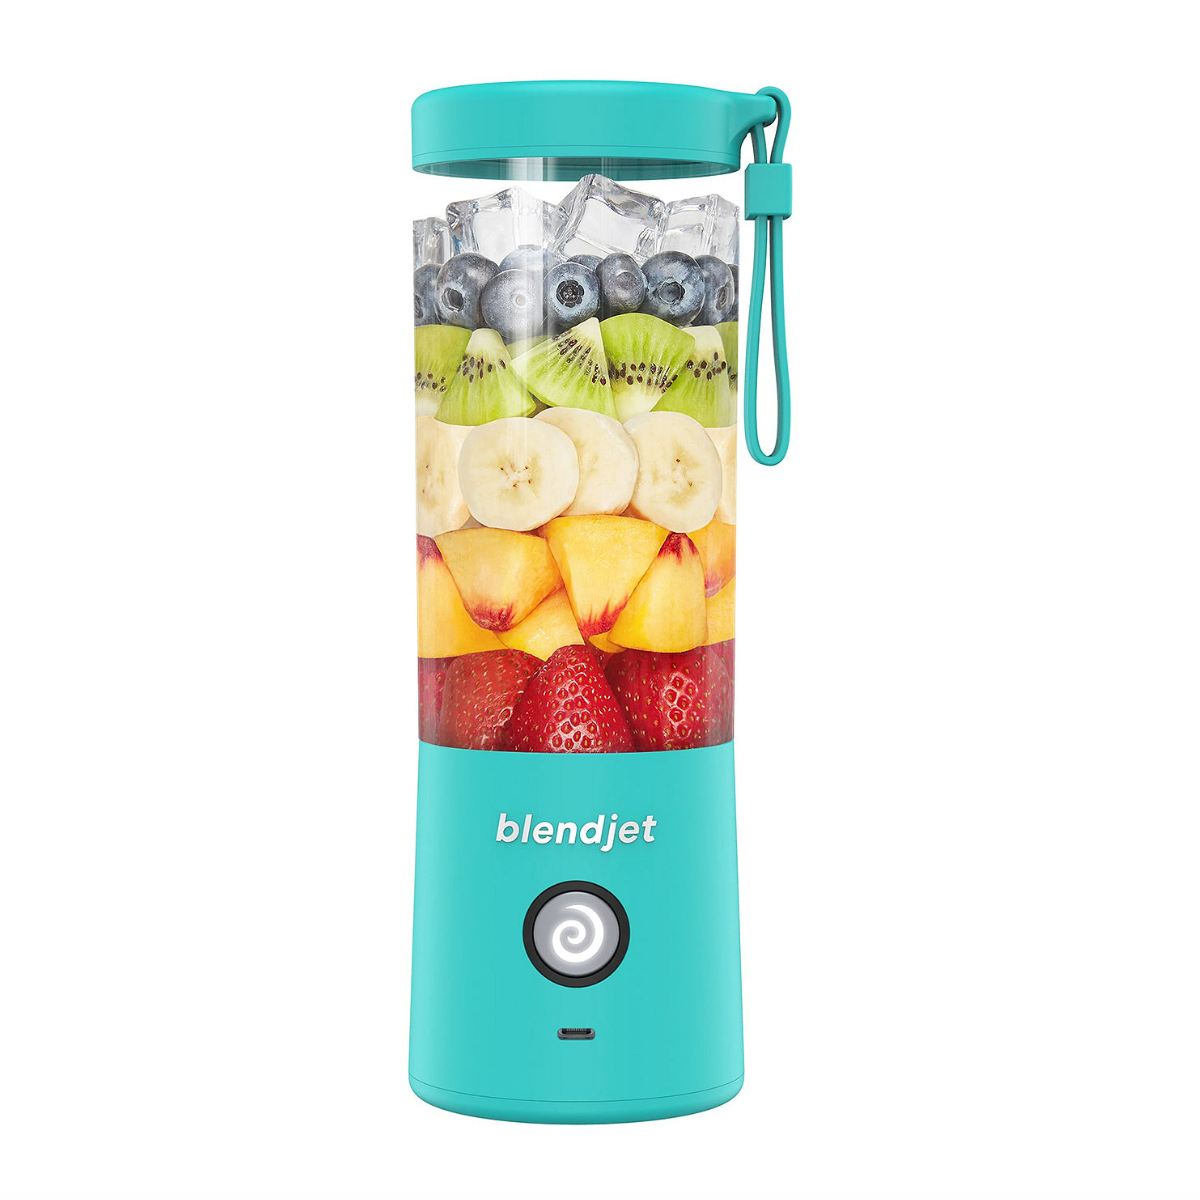 Portable Blenders - A New List Of Top 10 Ranking